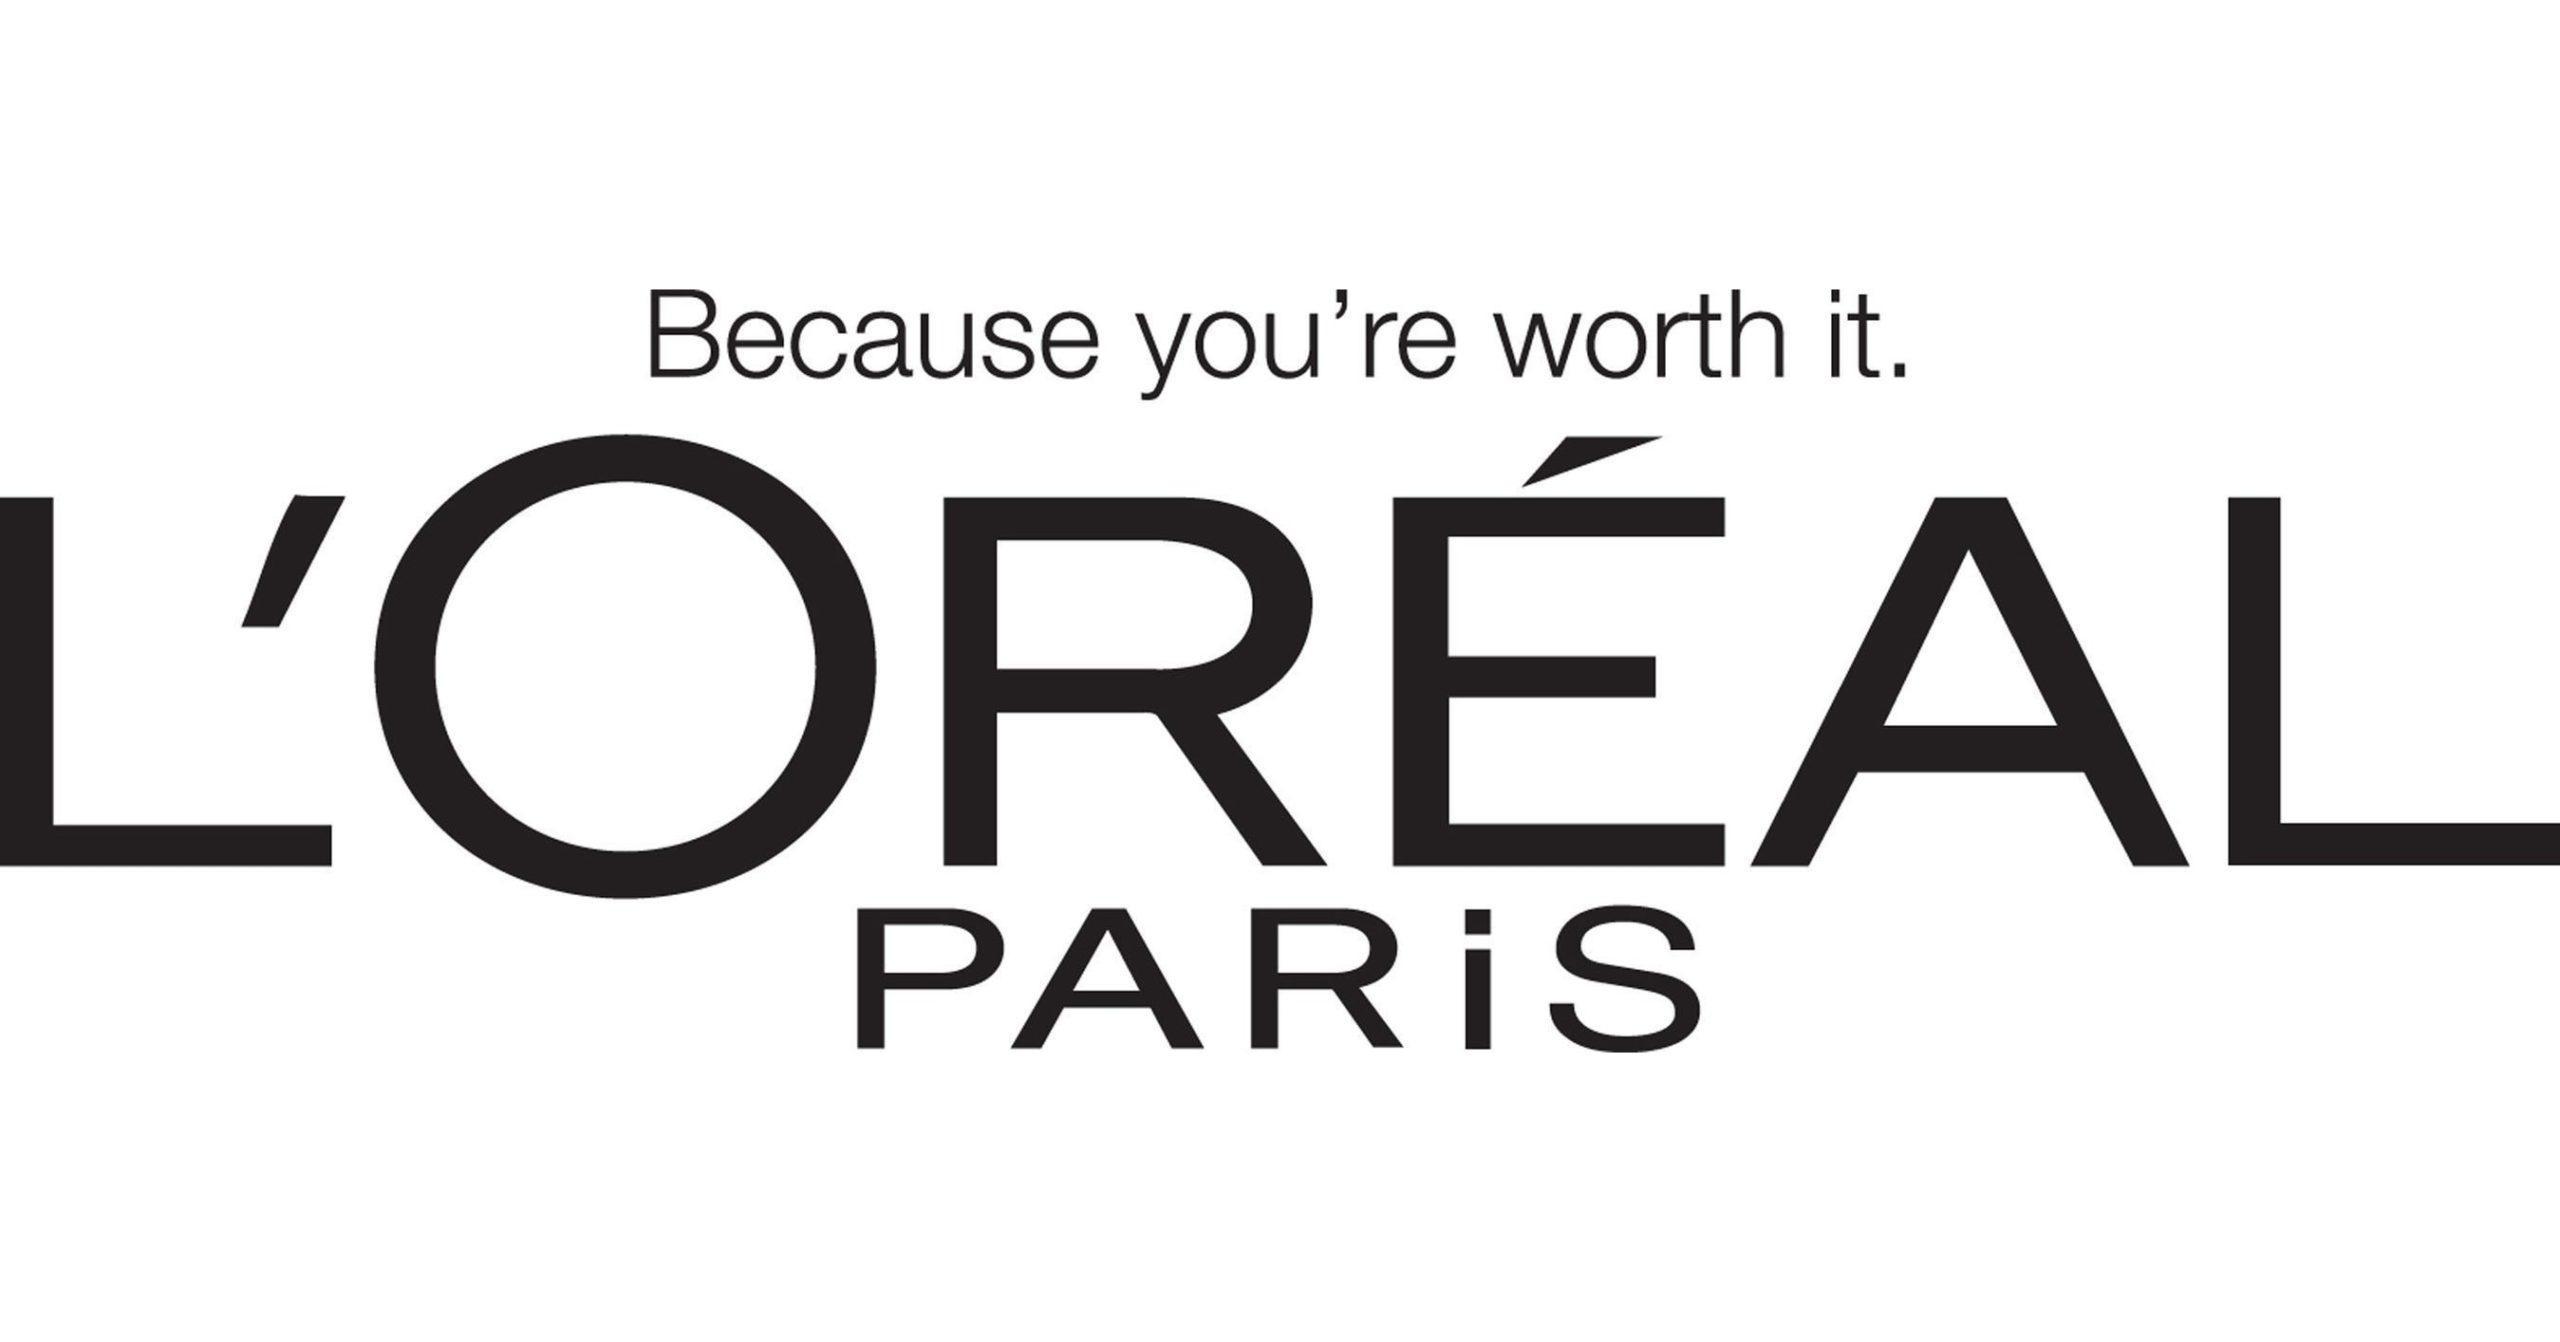 L'Oreal "Because you're worth it" slogan